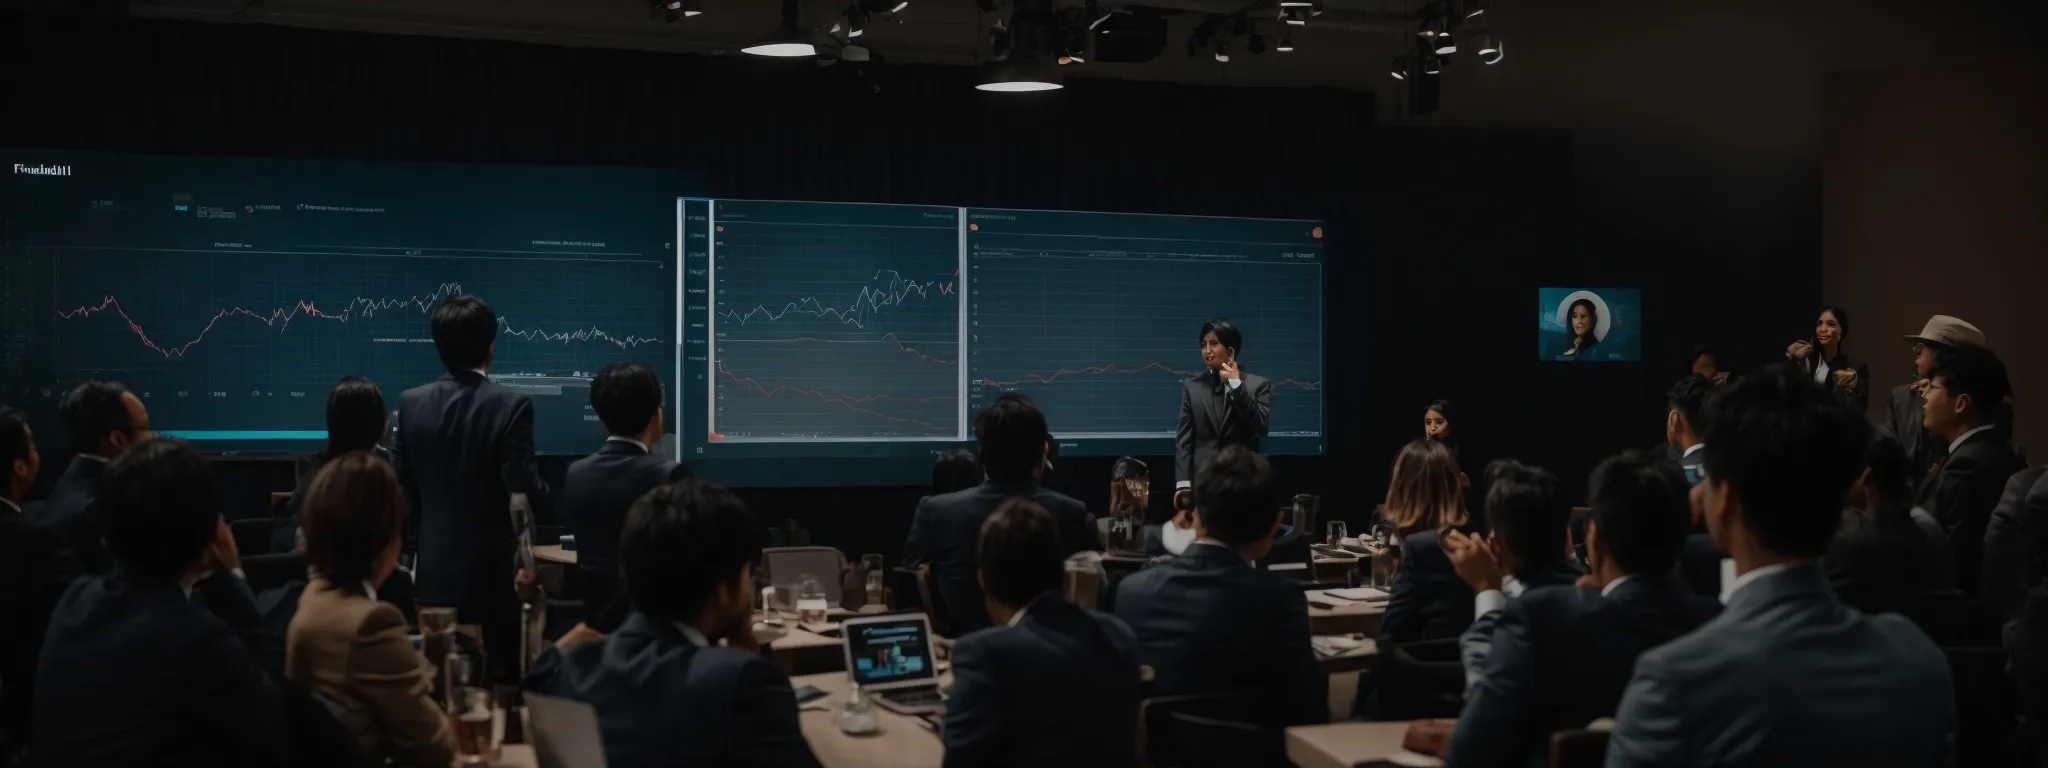 a group of professionals gather around a large screen displaying a graph that shows a notable trend upwards.